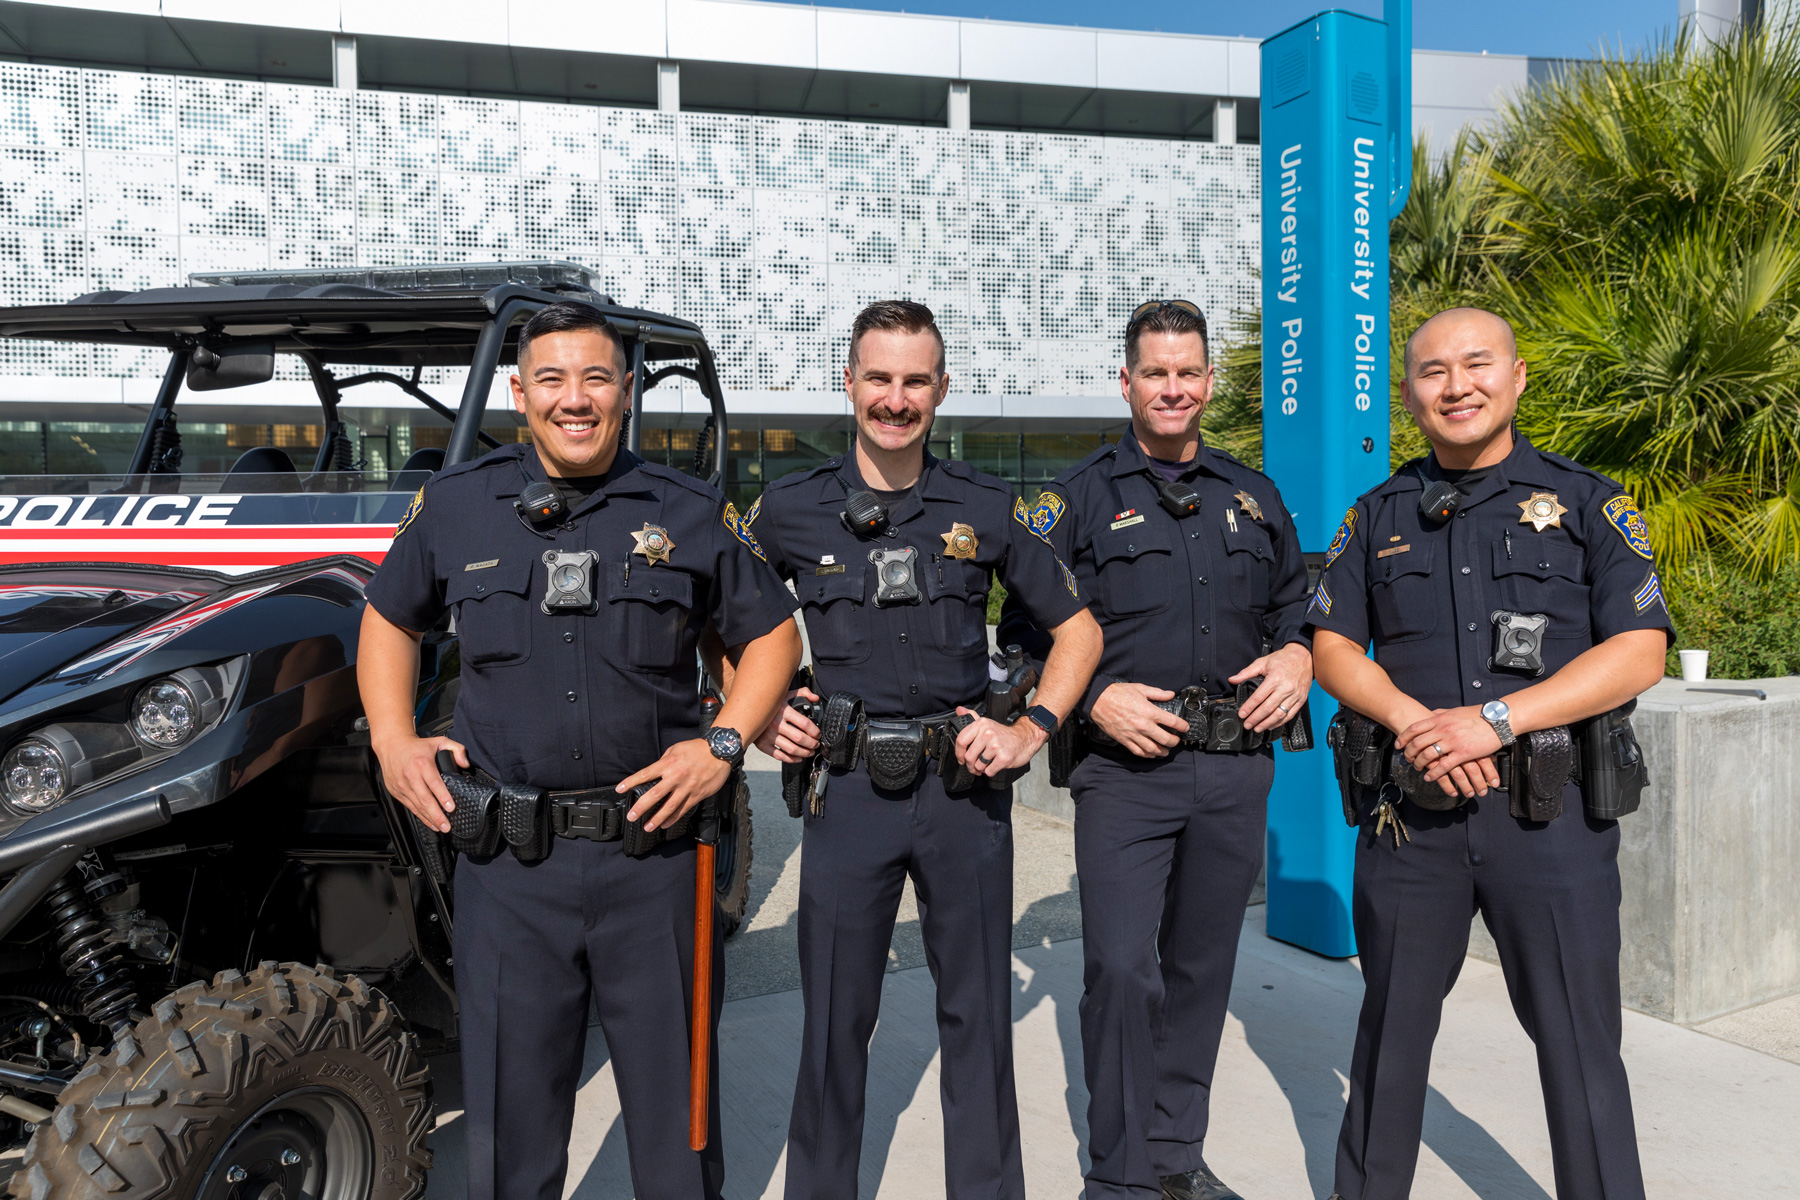 A group of SJSU campus cops pose with a smile on campus.